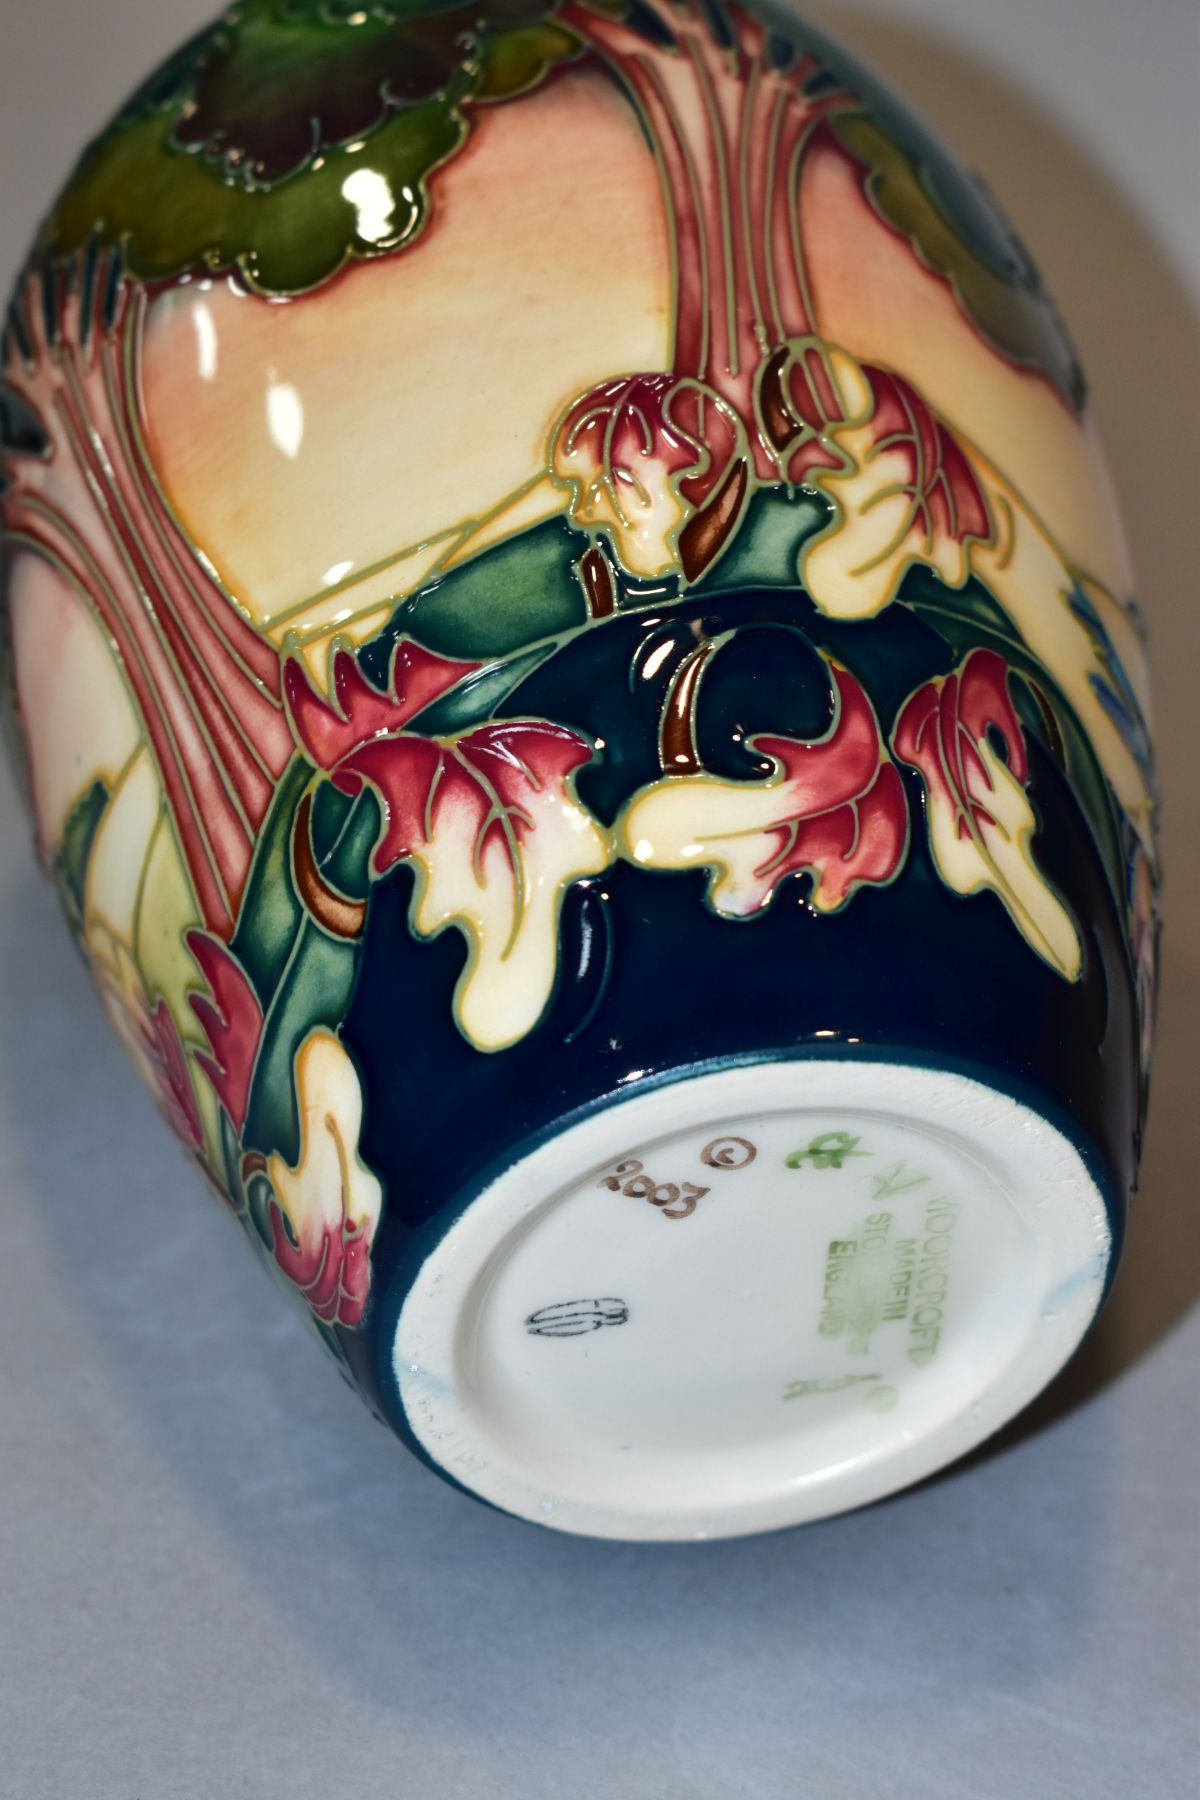 A BOXED MOORCROFT POTTERY VASE, 'Evening Sky' 2003 by Emma Bosson, impressed backstamp and painted - Image 6 of 6